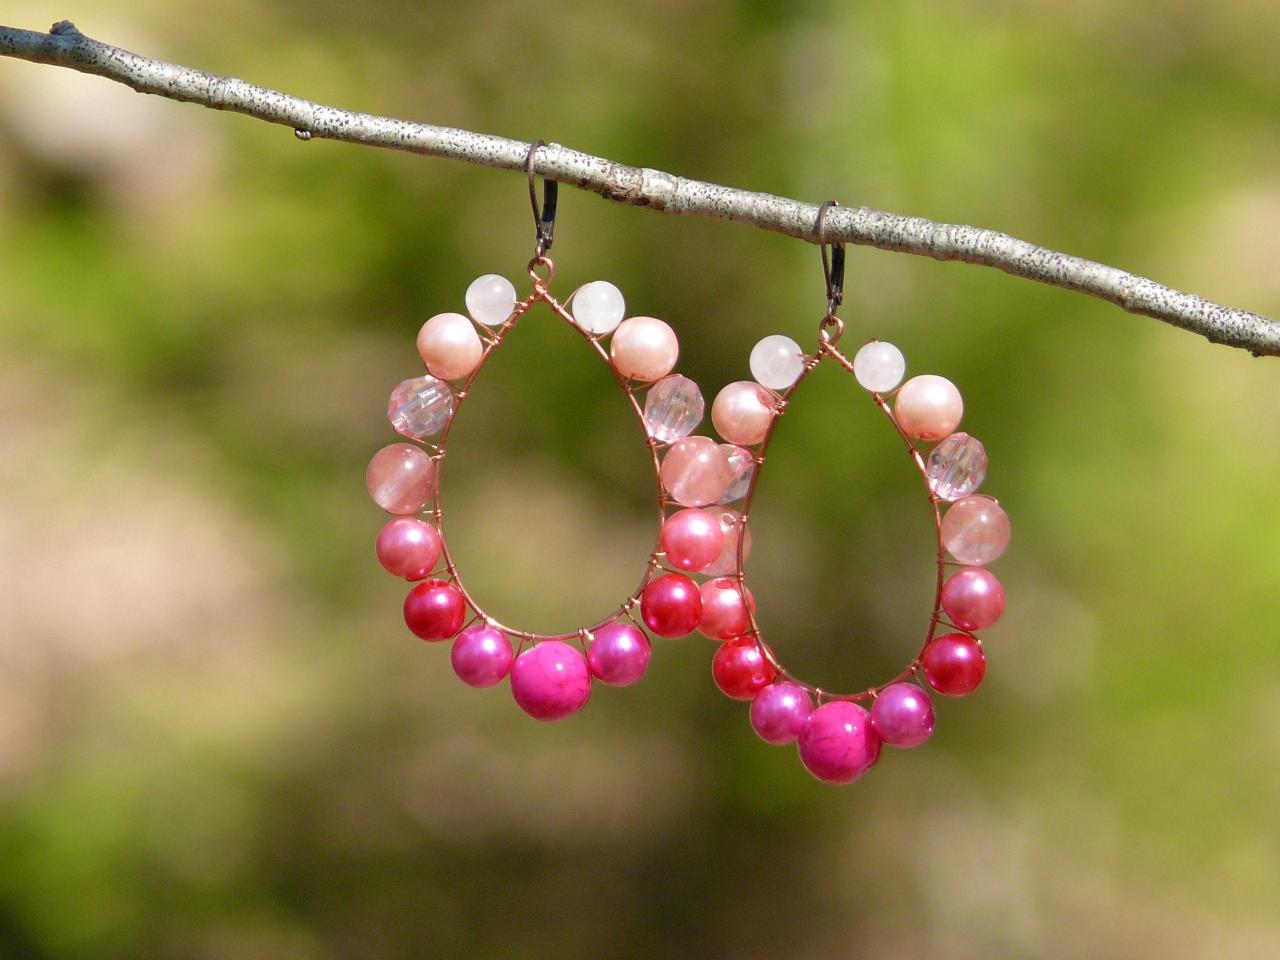 Pink Earrings With Rose Quartz And Cherry Quartz, Large Pink Boho Earrings, Statement Pink Earrings, Wire Wrapped Copper Earrings